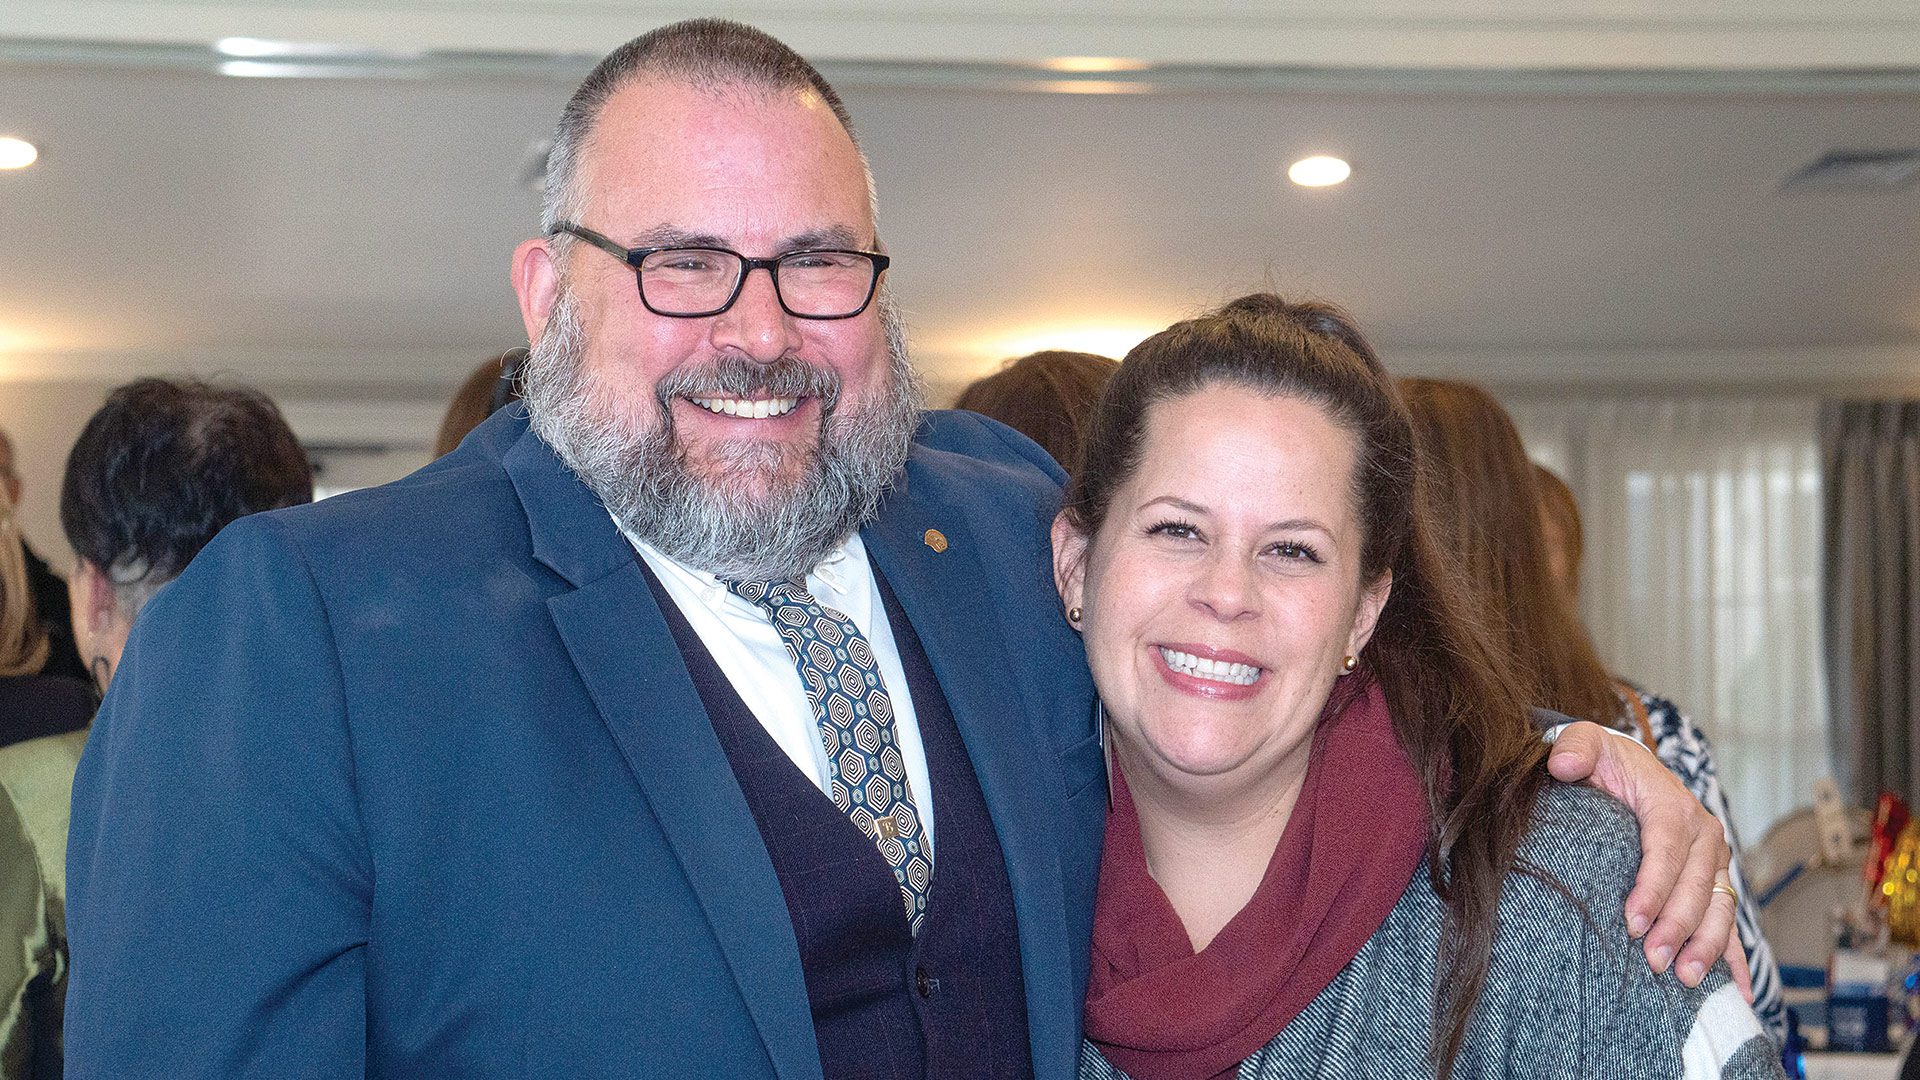 BUW President and CEO Tom Bernard with guest speaker Natalia DeRuzzio from Volunteers in Medicine Berkshires, one of the agencies BUW supports through donor contributions